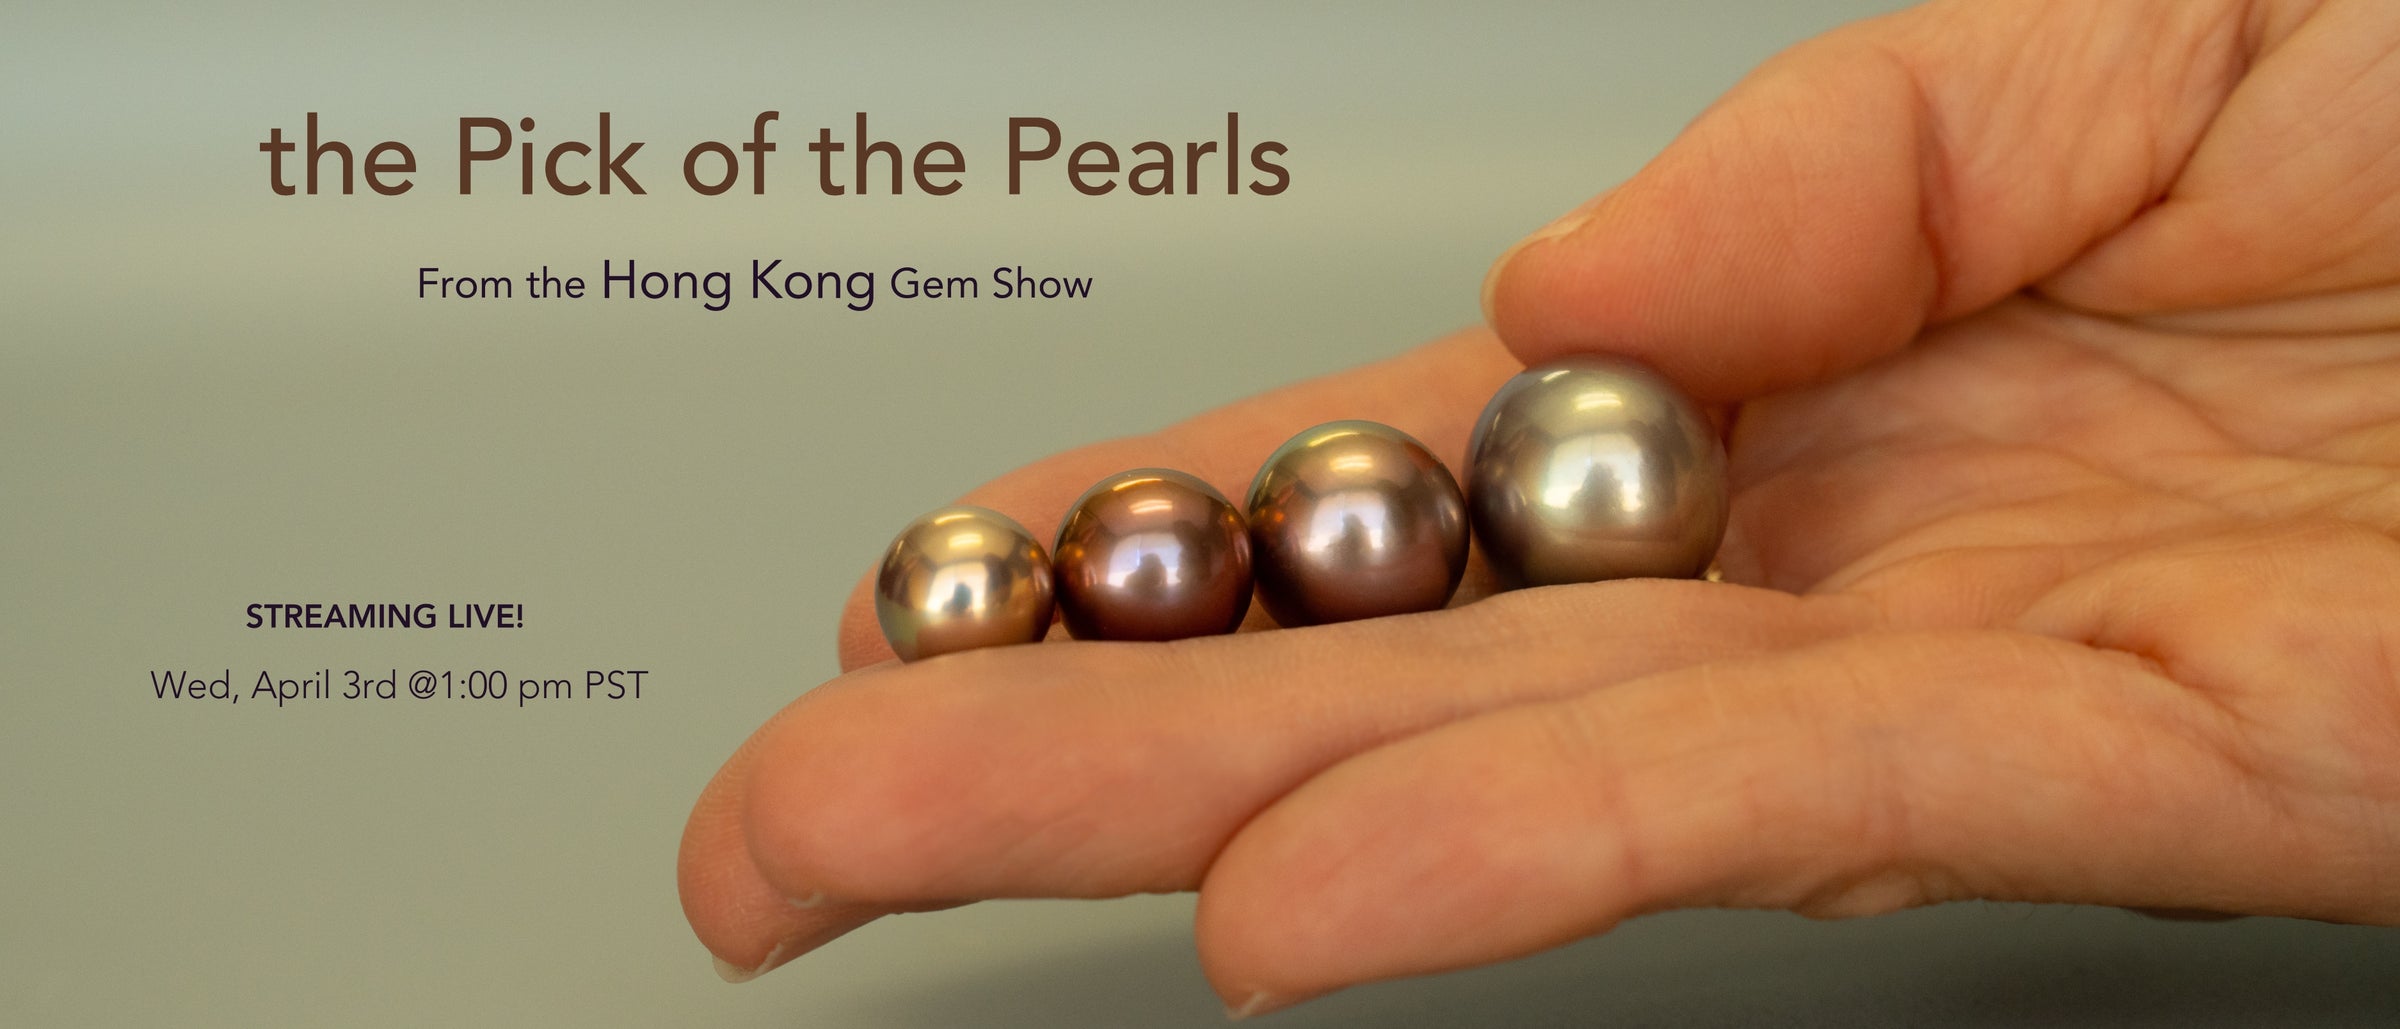 the pick of the pearls from the hong kong gem show